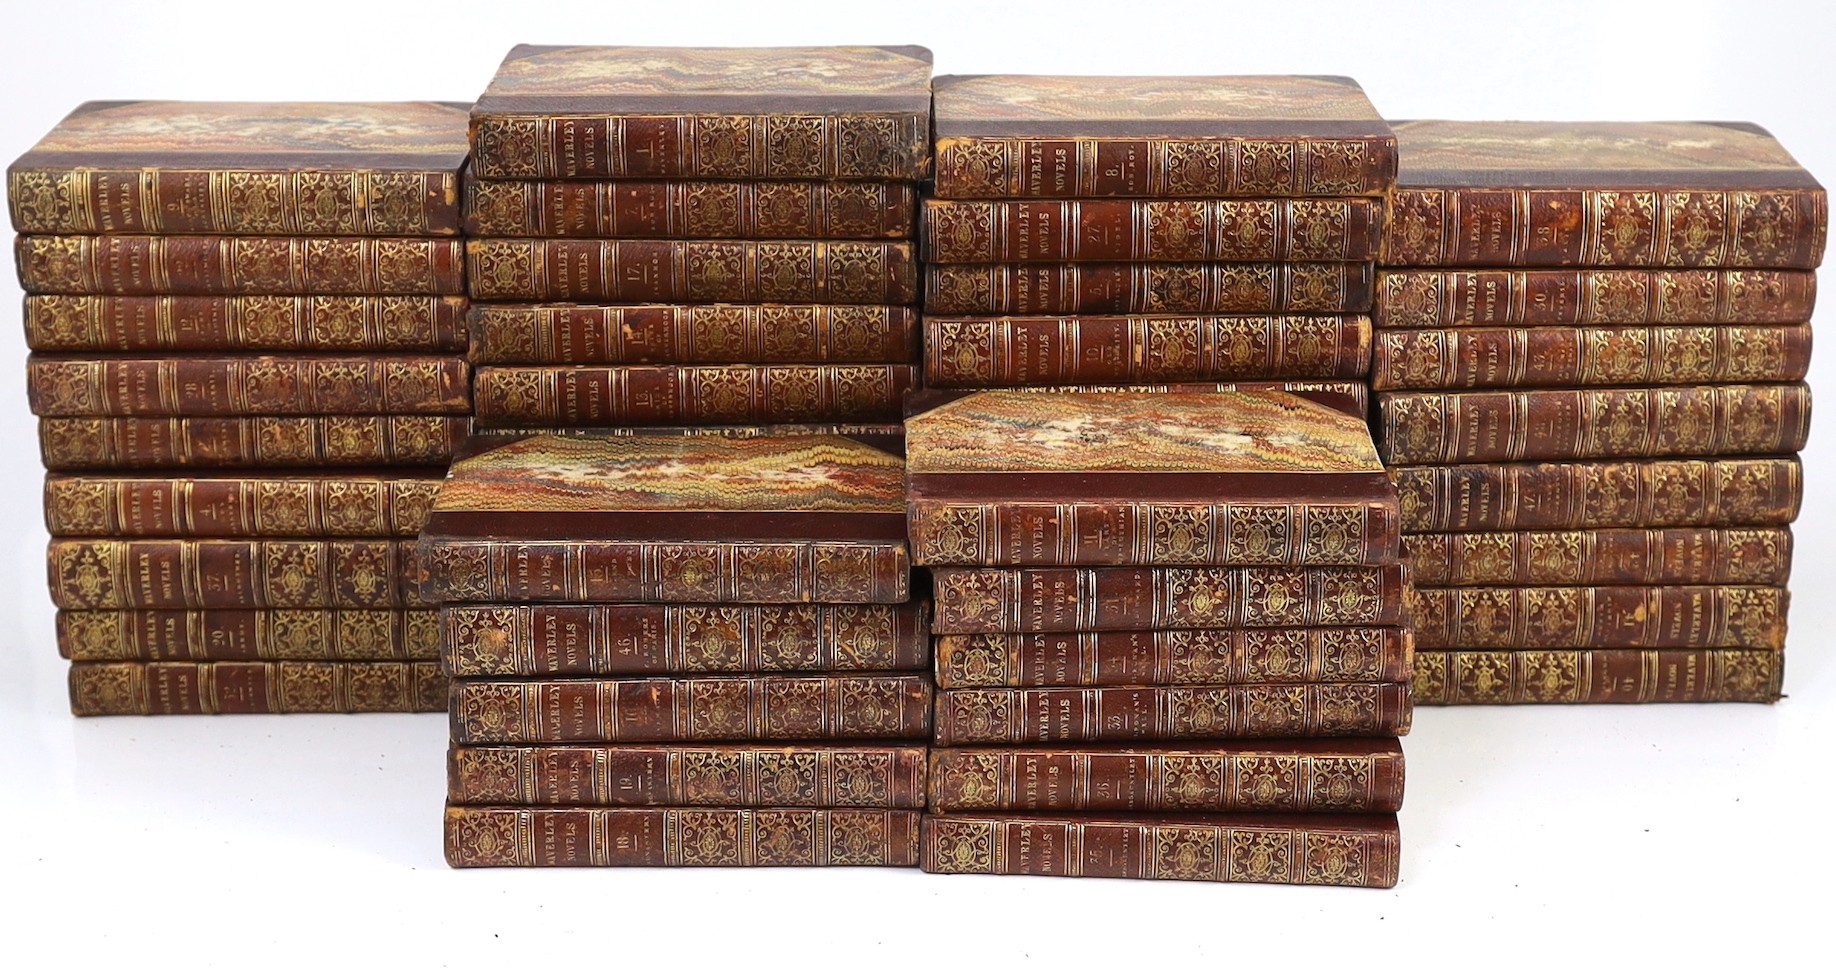 Scott, Sir Walker - Waverley Novels, 48 vols., engraved pictorial and printed titles, frontispieces; contemp. gilt-decorated maroon half morocco and marbled boards with panelled spines, marbled edges and e/ps., sm.8vo. E